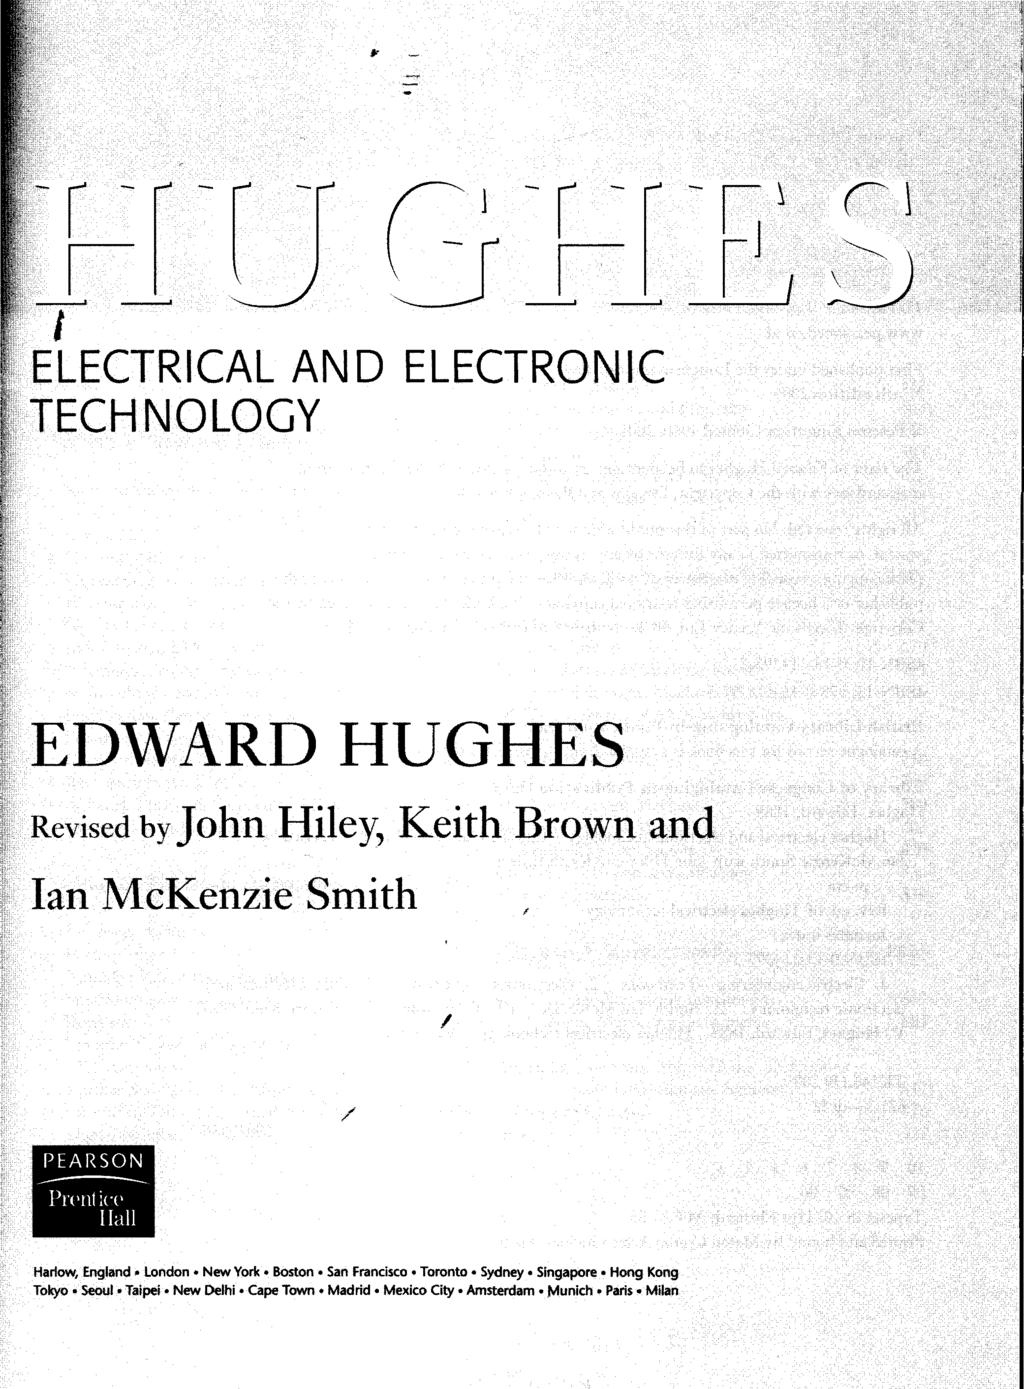 / 1 ELECTRICAL AND ELECTRONIC TECHNOLOGY EDWARD HUGHES Revised by John Hiley, Keith Brown and Ian McKenzie Smith Hariow, England London New